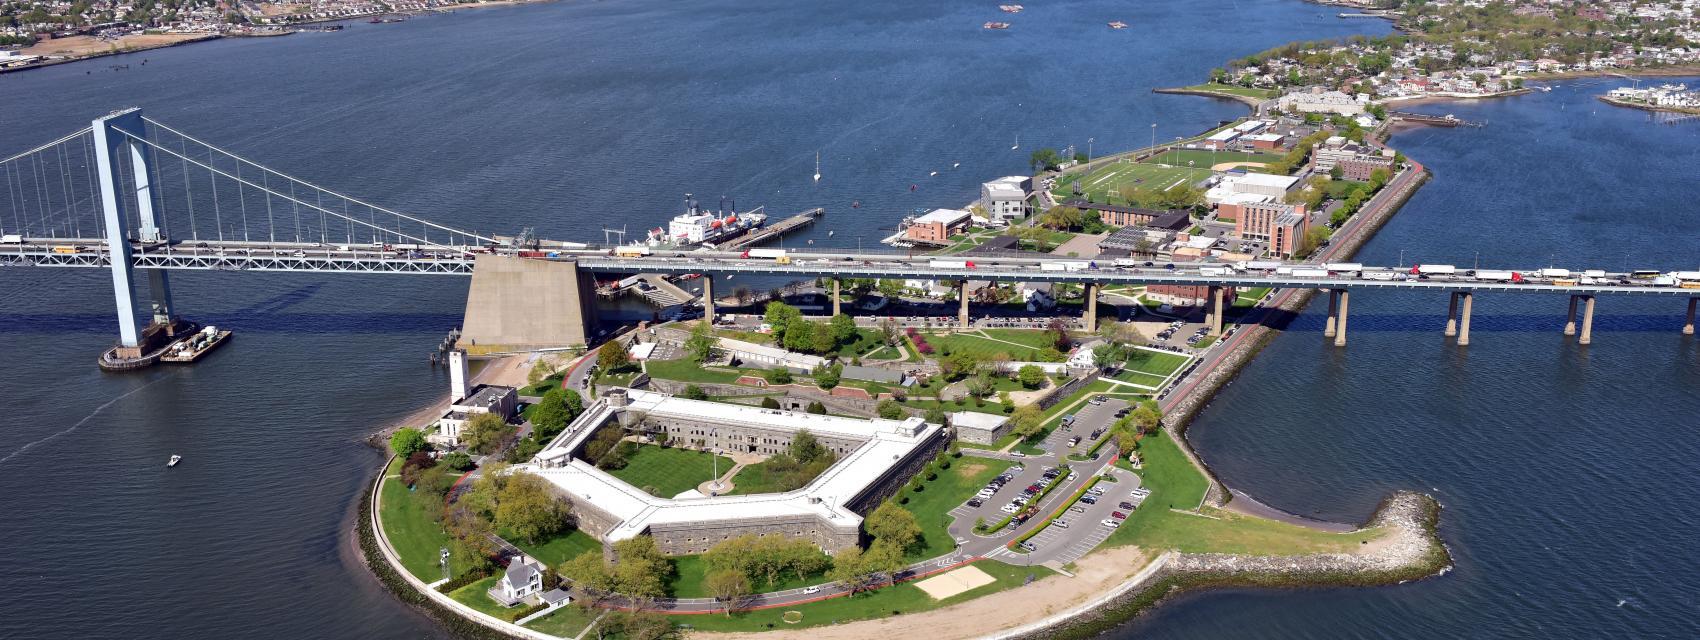 The State University of New York Maritime College | SUNY Maritime College 